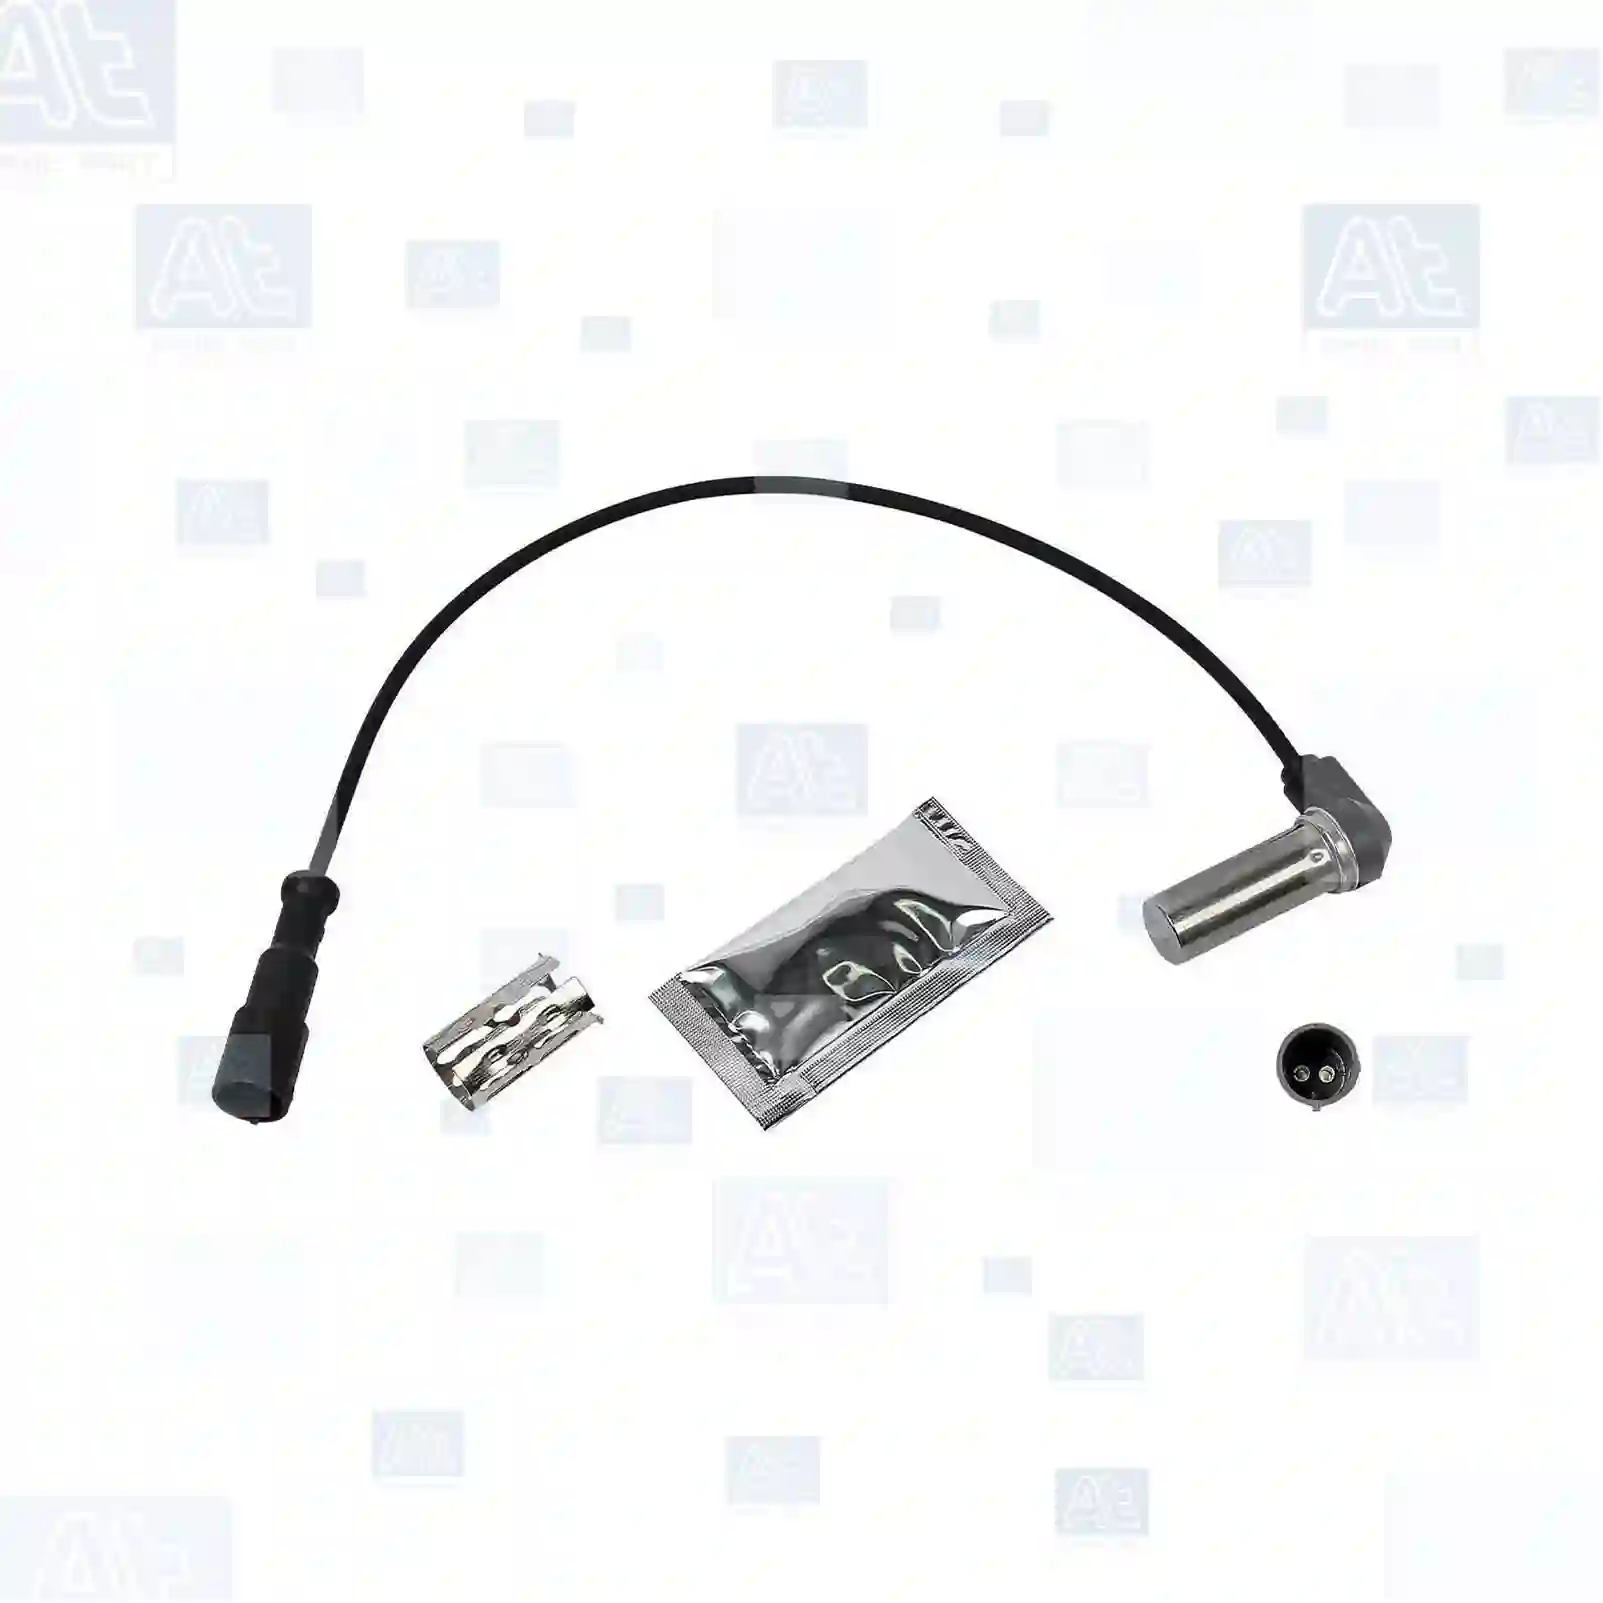 ABS sensor, at no 77710696, oem no: D04490401, 0233170100, 0233170500, 0082826, 1238548, 1315698, 1359834, 1504951, 1506005, 1518724, 1518728, 1616874, 1778552, 669713, 82826, 865038, 876714, CF102959, 708709158, 8709158, 42061638, 500641993, 5006041993, 5801115879, 9441032808, JAE0250410055, 80376, 692301708, 81271200021, 81271200023, N2255200061, 0025423118, 0045424418, 3015420117, 47900-9X403, 518029, 5000790125, 5010604322, 5021170121, 5021170122, 5021170125, 5021170127, 3029023100, 4029100200, 1784588, 1934568, 050019, 056718, 7788005000, 7788047000, 7788075000, 1195759, ZG50875-0008 At Spare Part | Engine, Accelerator Pedal, Camshaft, Connecting Rod, Crankcase, Crankshaft, Cylinder Head, Engine Suspension Mountings, Exhaust Manifold, Exhaust Gas Recirculation, Filter Kits, Flywheel Housing, General Overhaul Kits, Engine, Intake Manifold, Oil Cleaner, Oil Cooler, Oil Filter, Oil Pump, Oil Sump, Piston & Liner, Sensor & Switch, Timing Case, Turbocharger, Cooling System, Belt Tensioner, Coolant Filter, Coolant Pipe, Corrosion Prevention Agent, Drive, Expansion Tank, Fan, Intercooler, Monitors & Gauges, Radiator, Thermostat, V-Belt / Timing belt, Water Pump, Fuel System, Electronical Injector Unit, Feed Pump, Fuel Filter, cpl., Fuel Gauge Sender,  Fuel Line, Fuel Pump, Fuel Tank, Injection Line Kit, Injection Pump, Exhaust System, Clutch & Pedal, Gearbox, Propeller Shaft, Axles, Brake System, Hubs & Wheels, Suspension, Leaf Spring, Universal Parts / Accessories, Steering, Electrical System, Cabin ABS sensor, at no 77710696, oem no: D04490401, 0233170100, 0233170500, 0082826, 1238548, 1315698, 1359834, 1504951, 1506005, 1518724, 1518728, 1616874, 1778552, 669713, 82826, 865038, 876714, CF102959, 708709158, 8709158, 42061638, 500641993, 5006041993, 5801115879, 9441032808, JAE0250410055, 80376, 692301708, 81271200021, 81271200023, N2255200061, 0025423118, 0045424418, 3015420117, 47900-9X403, 518029, 5000790125, 5010604322, 5021170121, 5021170122, 5021170125, 5021170127, 3029023100, 4029100200, 1784588, 1934568, 050019, 056718, 7788005000, 7788047000, 7788075000, 1195759, ZG50875-0008 At Spare Part | Engine, Accelerator Pedal, Camshaft, Connecting Rod, Crankcase, Crankshaft, Cylinder Head, Engine Suspension Mountings, Exhaust Manifold, Exhaust Gas Recirculation, Filter Kits, Flywheel Housing, General Overhaul Kits, Engine, Intake Manifold, Oil Cleaner, Oil Cooler, Oil Filter, Oil Pump, Oil Sump, Piston & Liner, Sensor & Switch, Timing Case, Turbocharger, Cooling System, Belt Tensioner, Coolant Filter, Coolant Pipe, Corrosion Prevention Agent, Drive, Expansion Tank, Fan, Intercooler, Monitors & Gauges, Radiator, Thermostat, V-Belt / Timing belt, Water Pump, Fuel System, Electronical Injector Unit, Feed Pump, Fuel Filter, cpl., Fuel Gauge Sender,  Fuel Line, Fuel Pump, Fuel Tank, Injection Line Kit, Injection Pump, Exhaust System, Clutch & Pedal, Gearbox, Propeller Shaft, Axles, Brake System, Hubs & Wheels, Suspension, Leaf Spring, Universal Parts / Accessories, Steering, Electrical System, Cabin